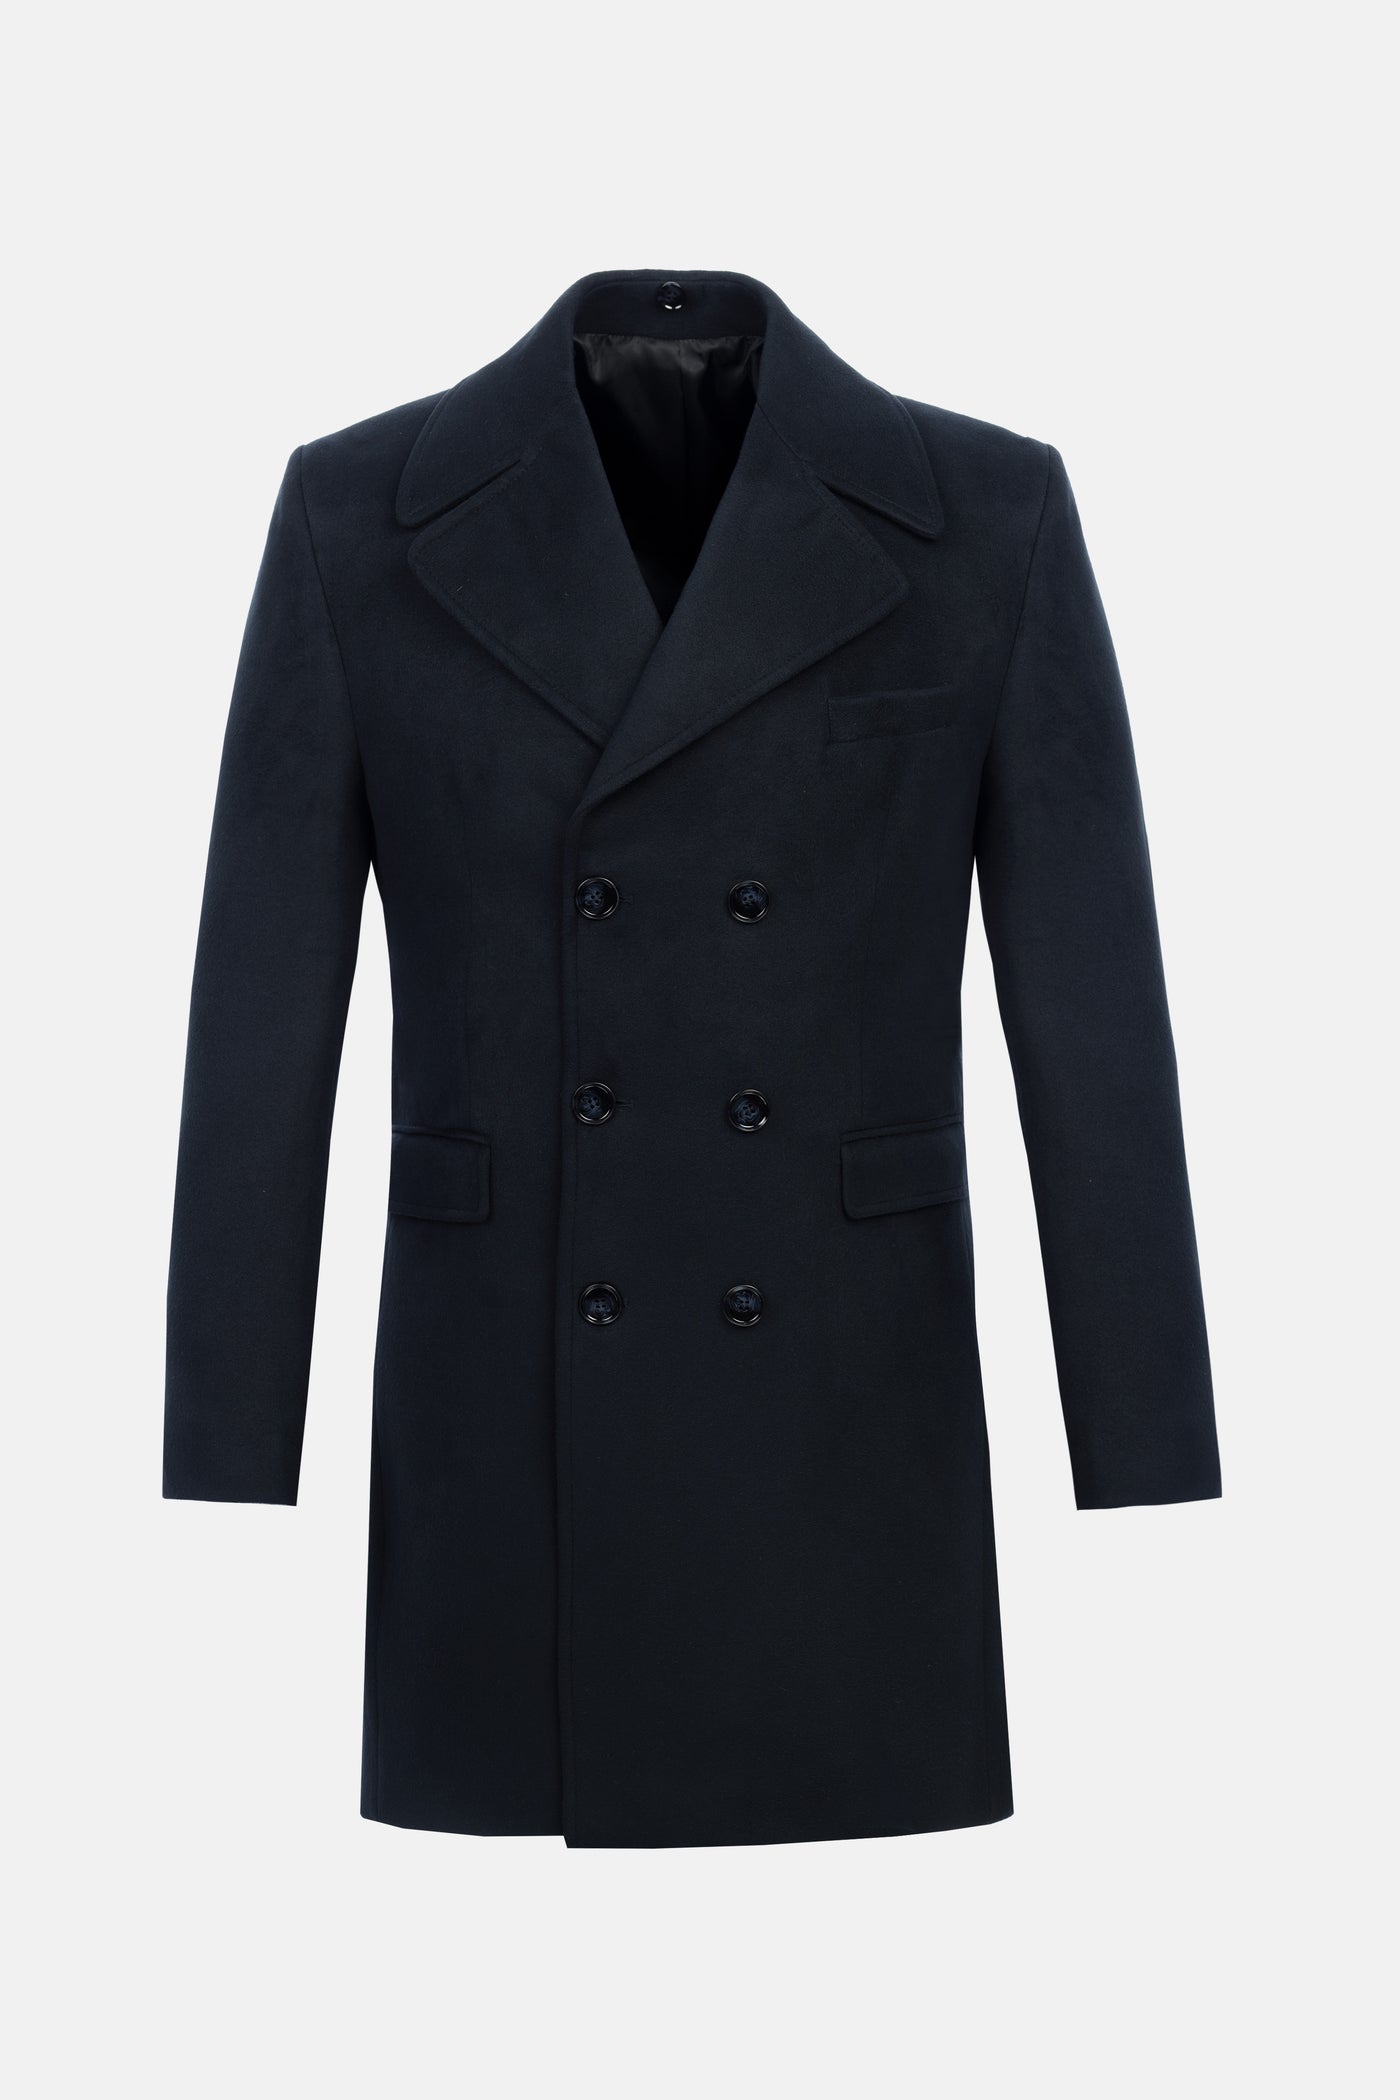 Woven Navy Long Coat with removable Fur piece